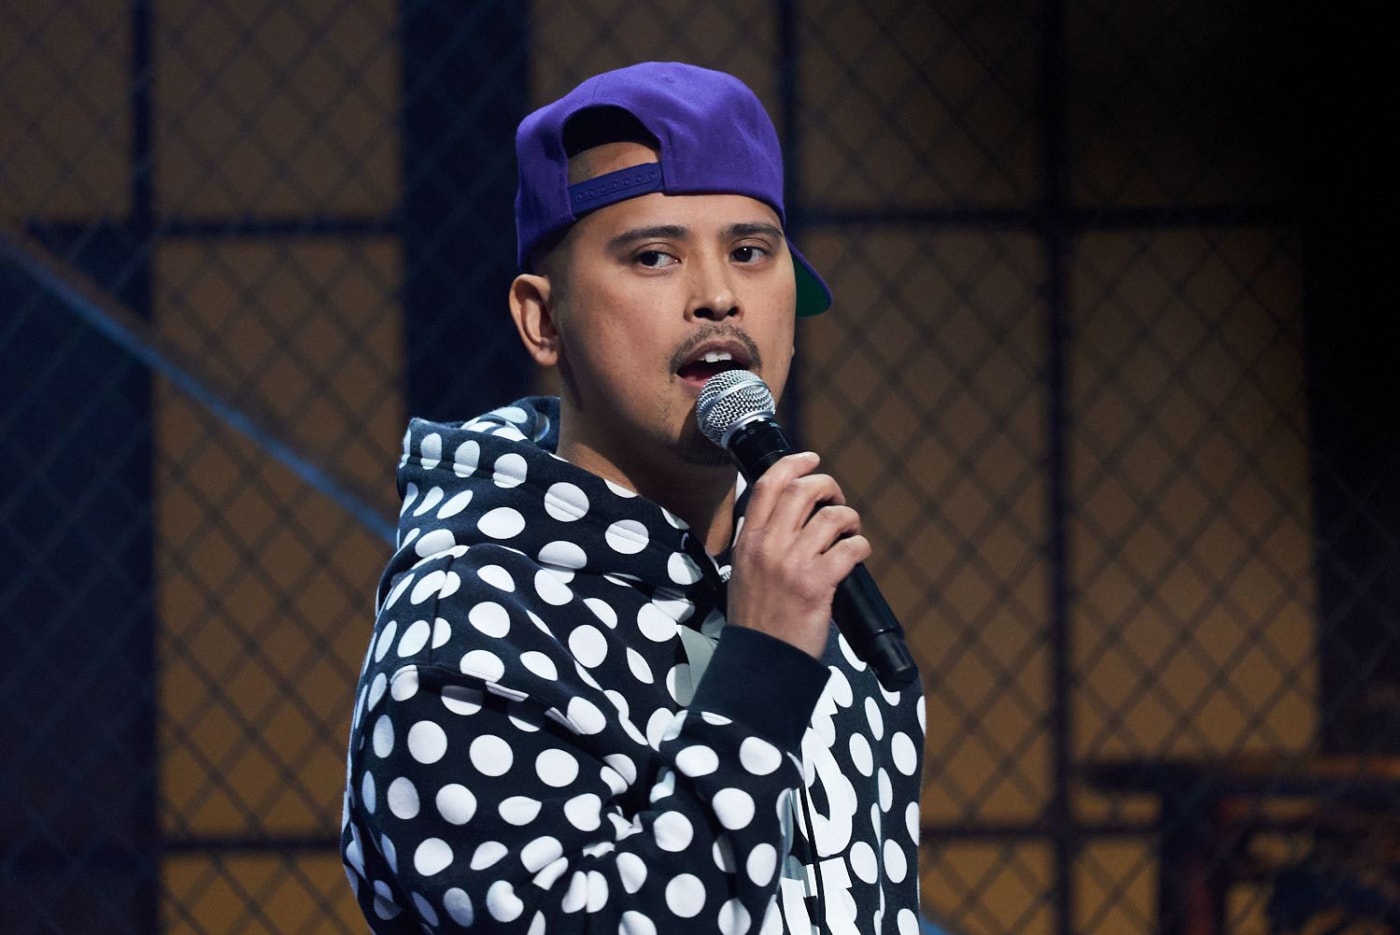 Filipino Canadian comedian Keith Pedro performs on stage